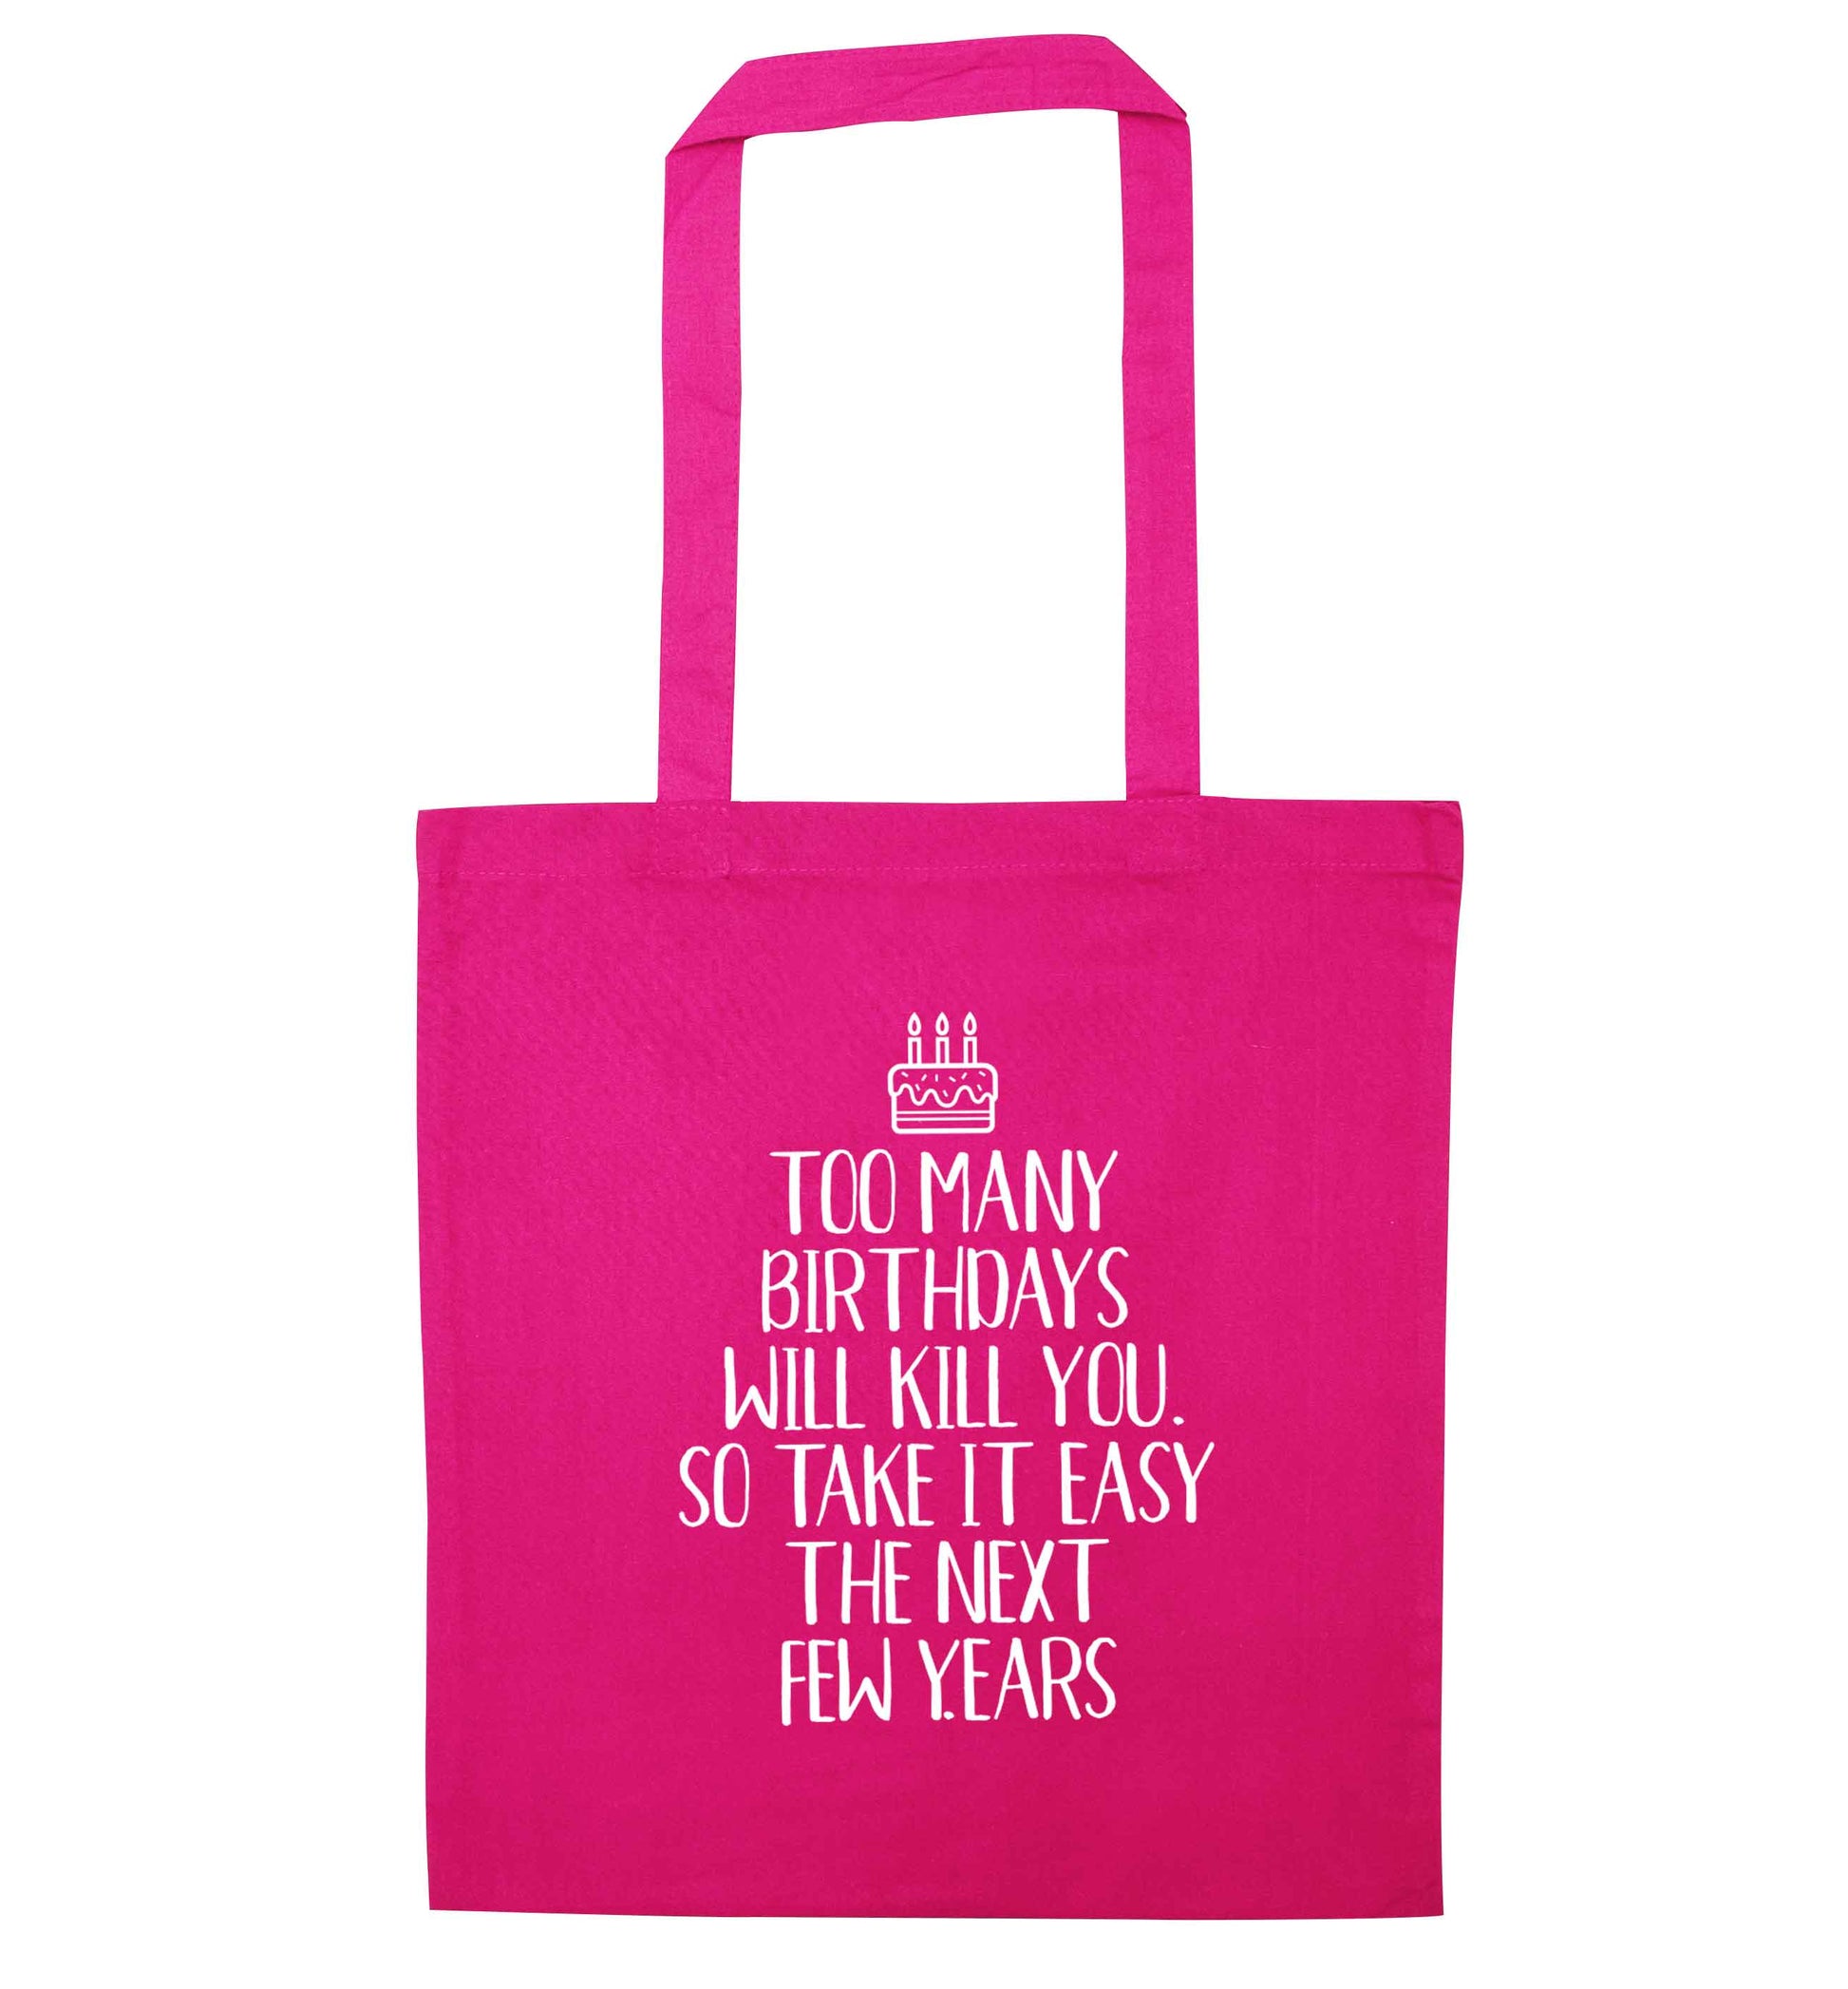 Too many birthdays will kill you so take it easy pink tote bag